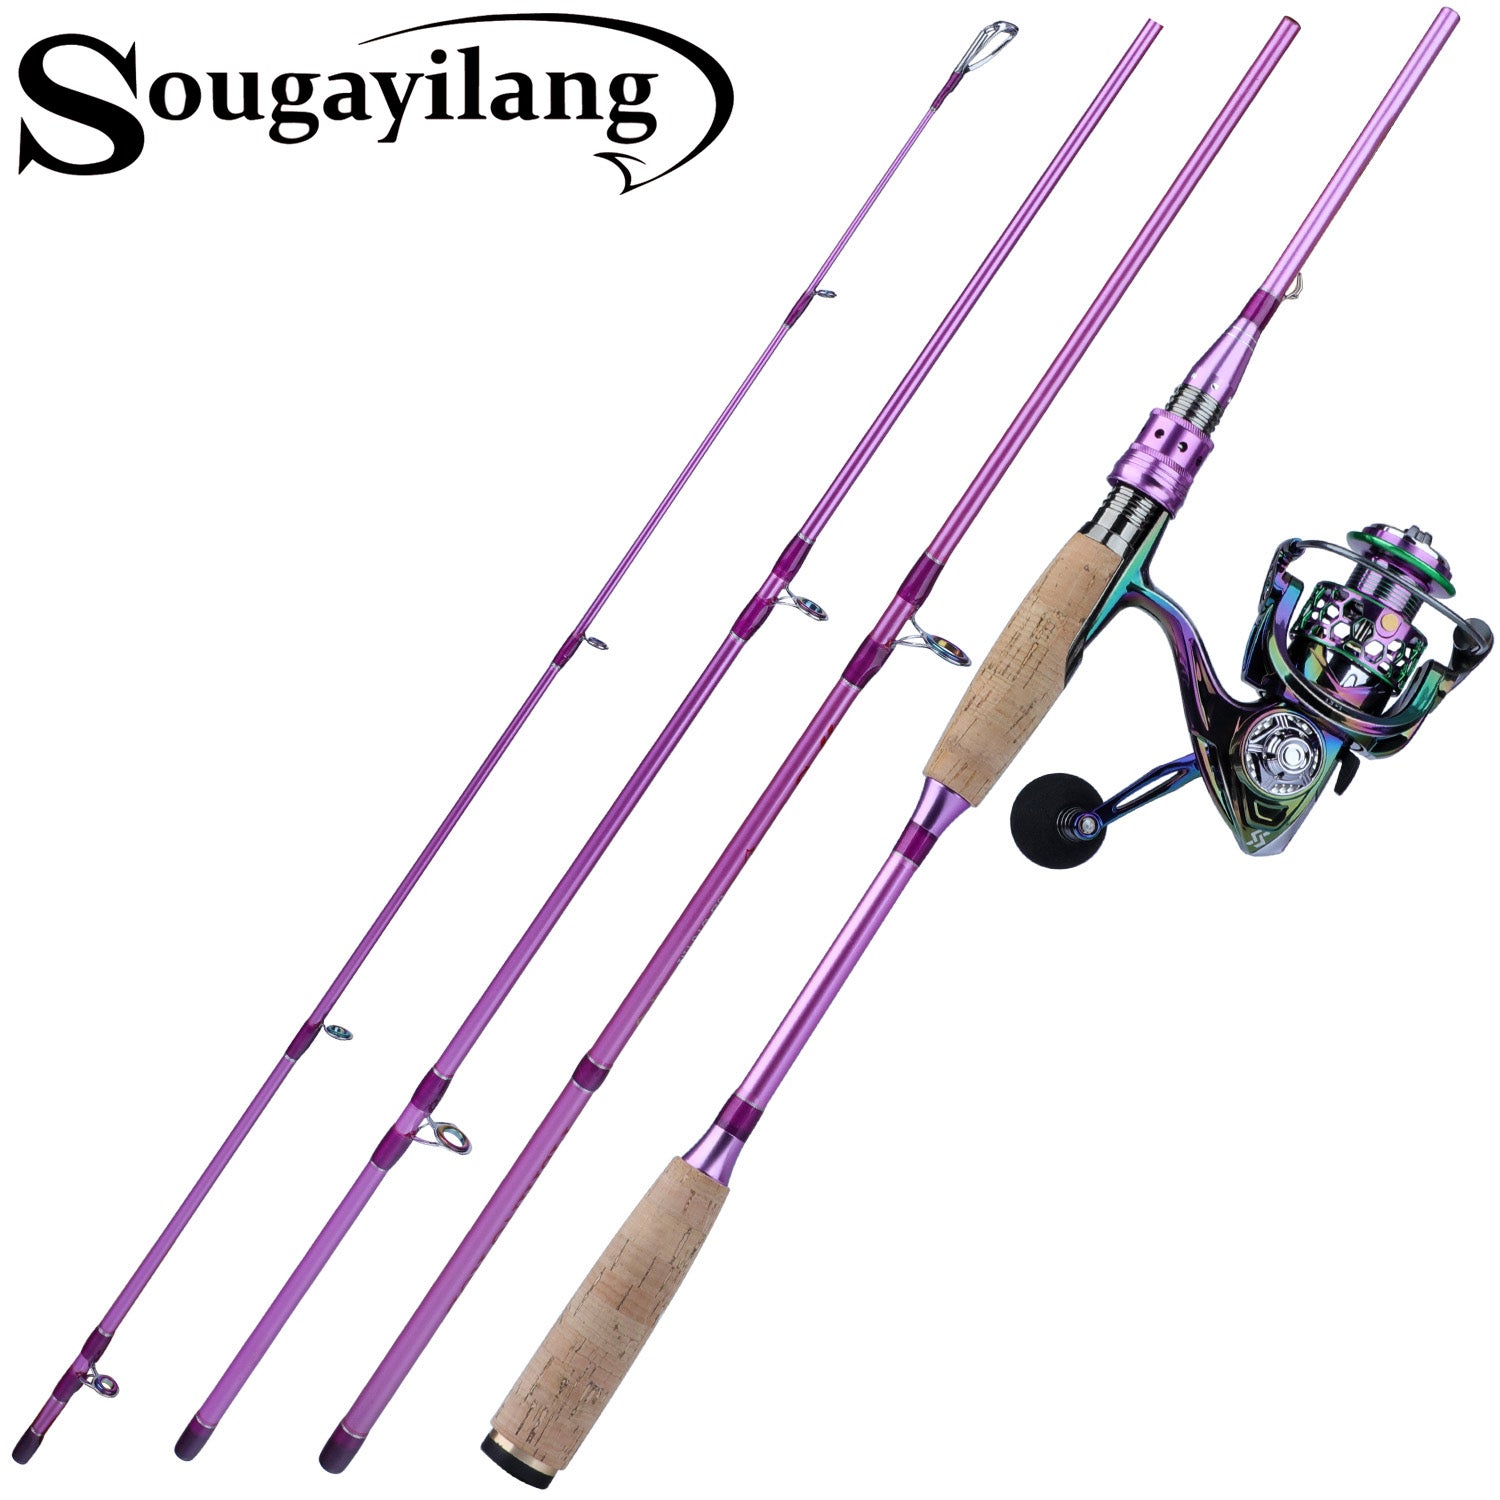  Sougayilang Spinning Combo, Stainless Steel Guides